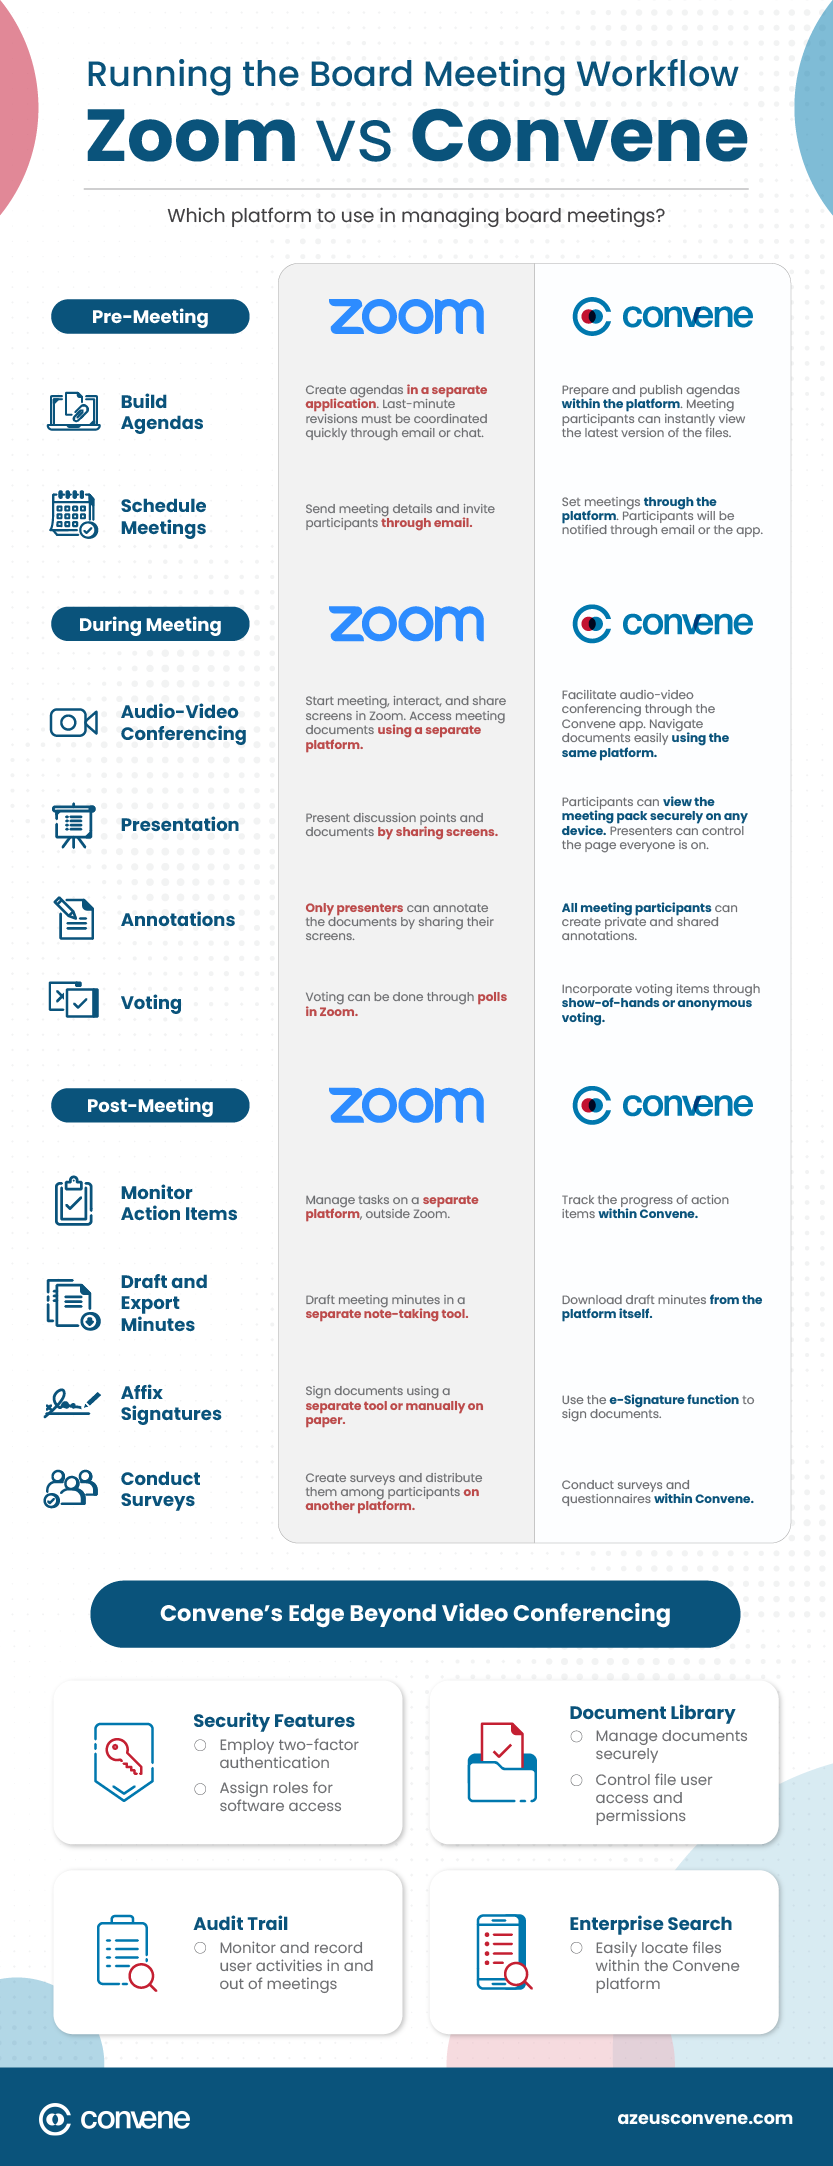 Infographic on the differences of Zoom and Convene in running board meetings